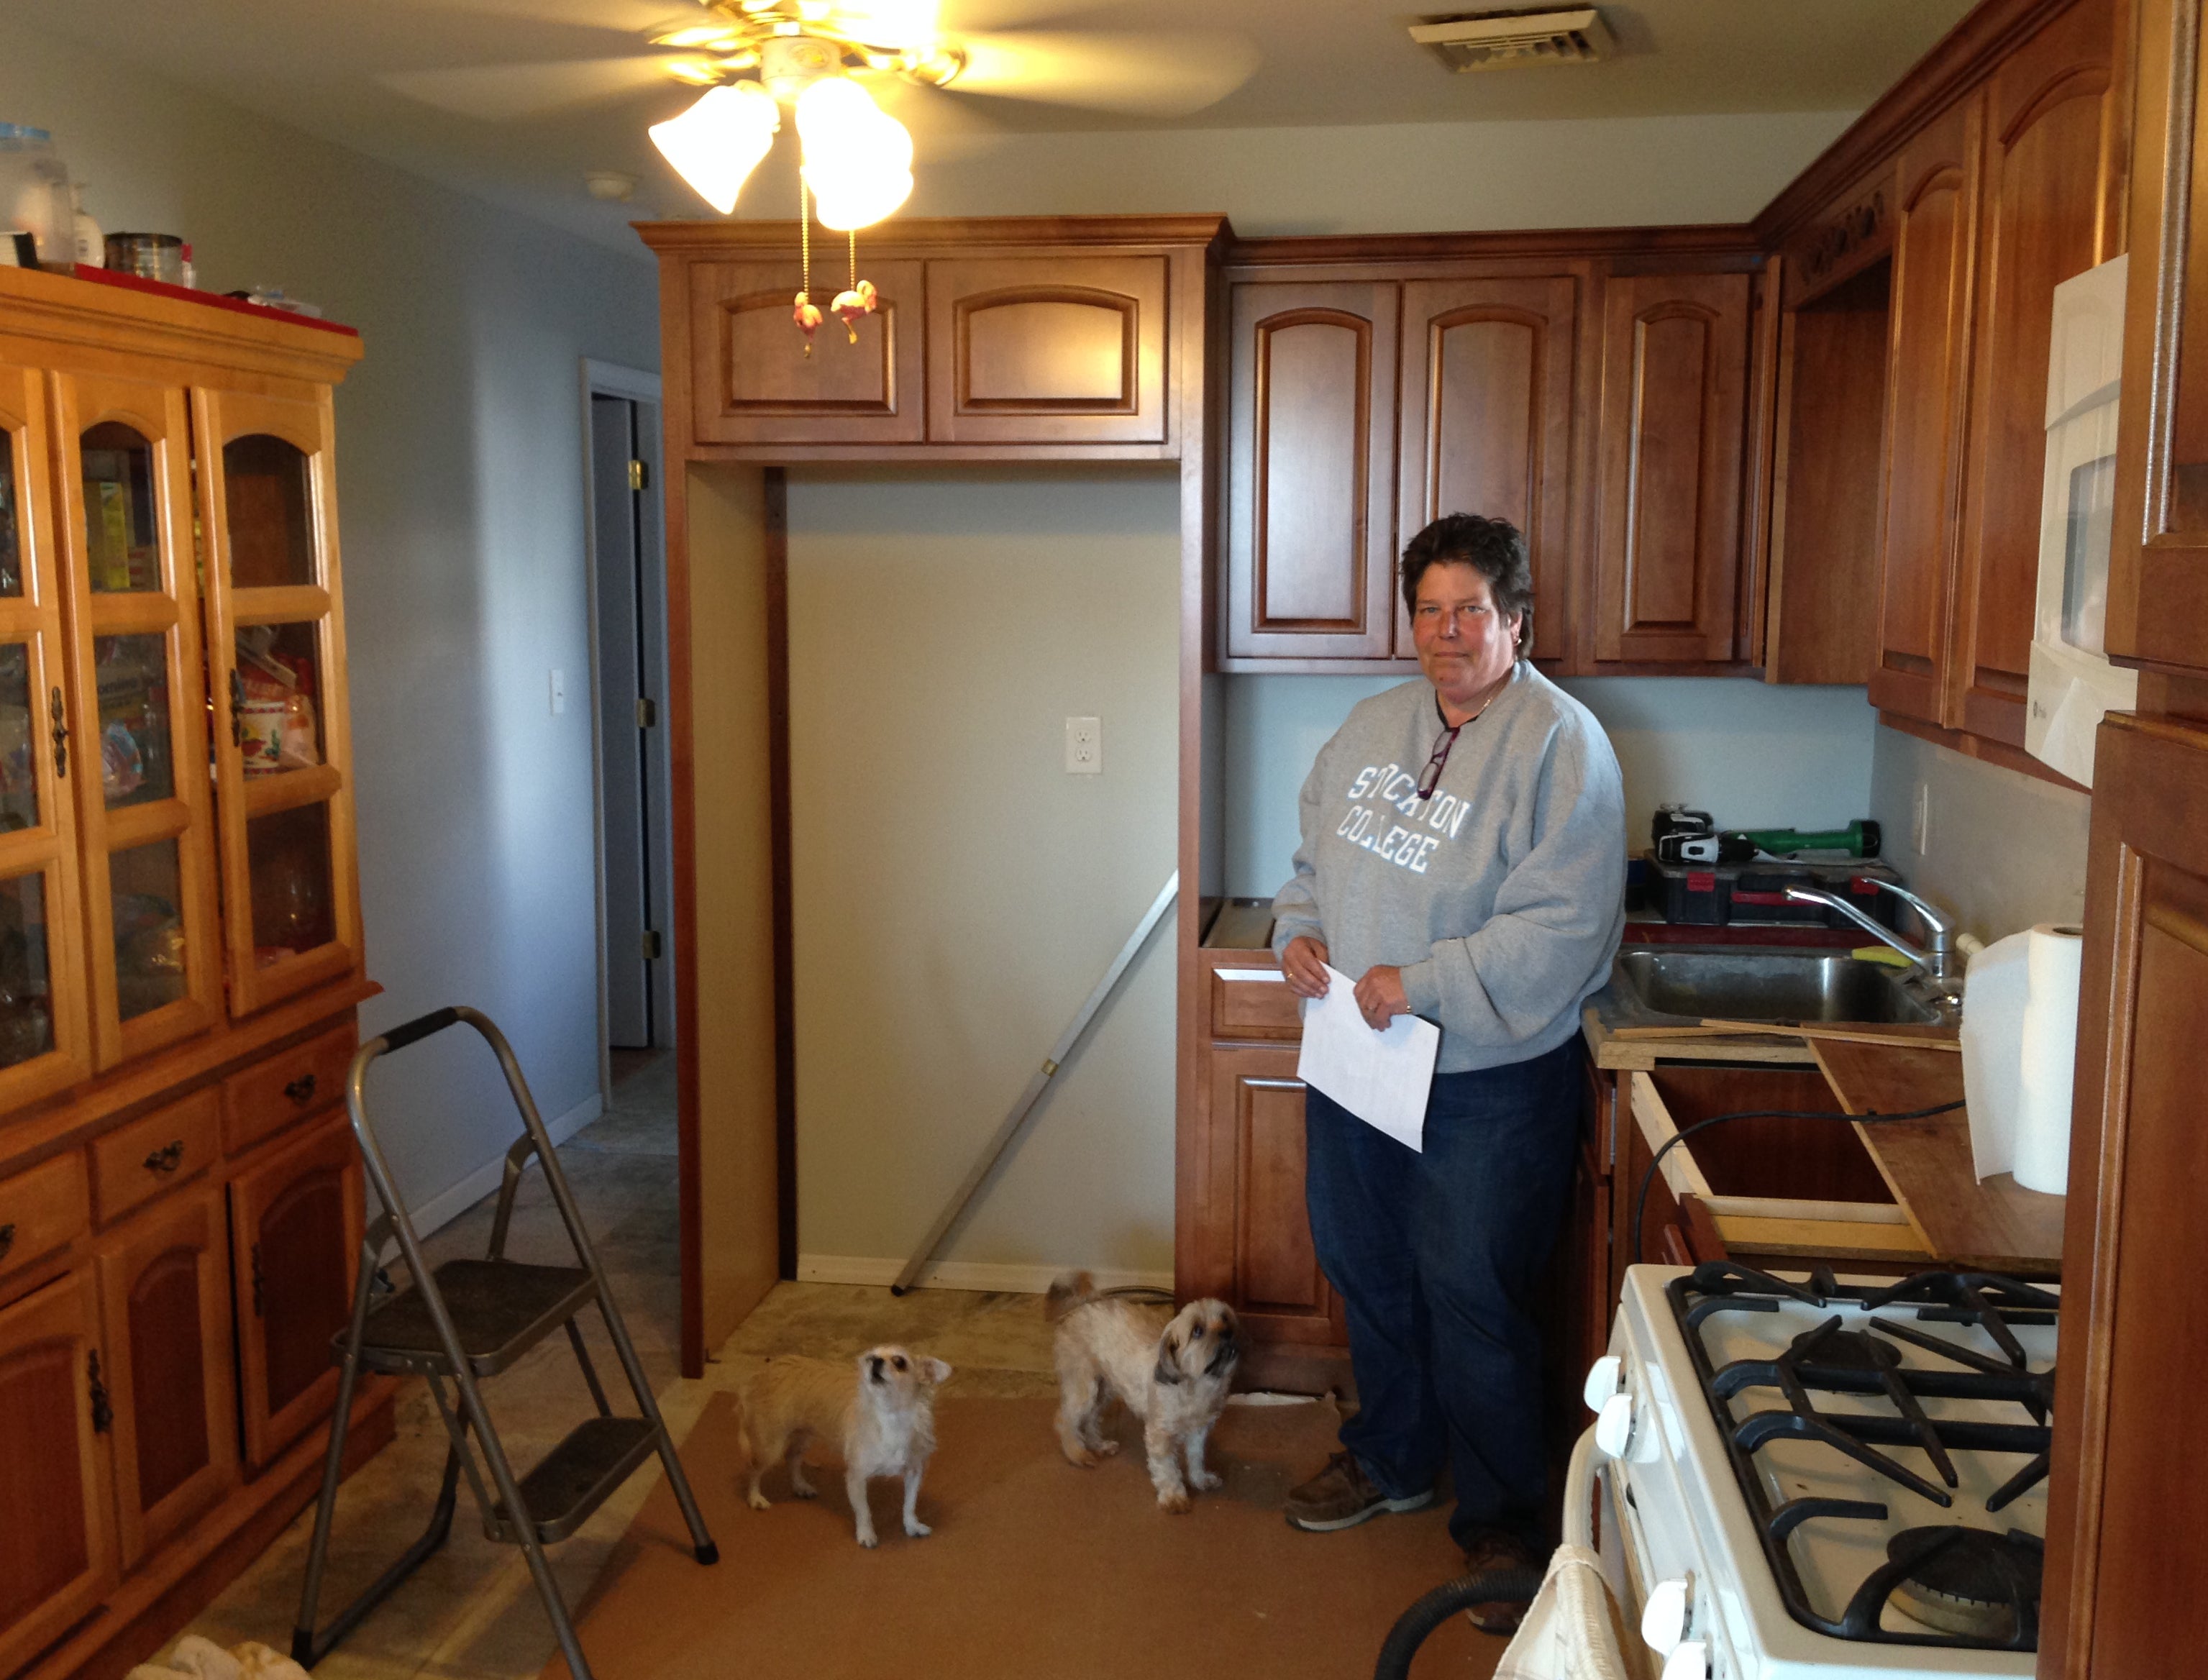  Lisa Stevens in her renovated kitchen, which was damaged during Sandy. (Tracey Samuelson/for NewsWorks) 